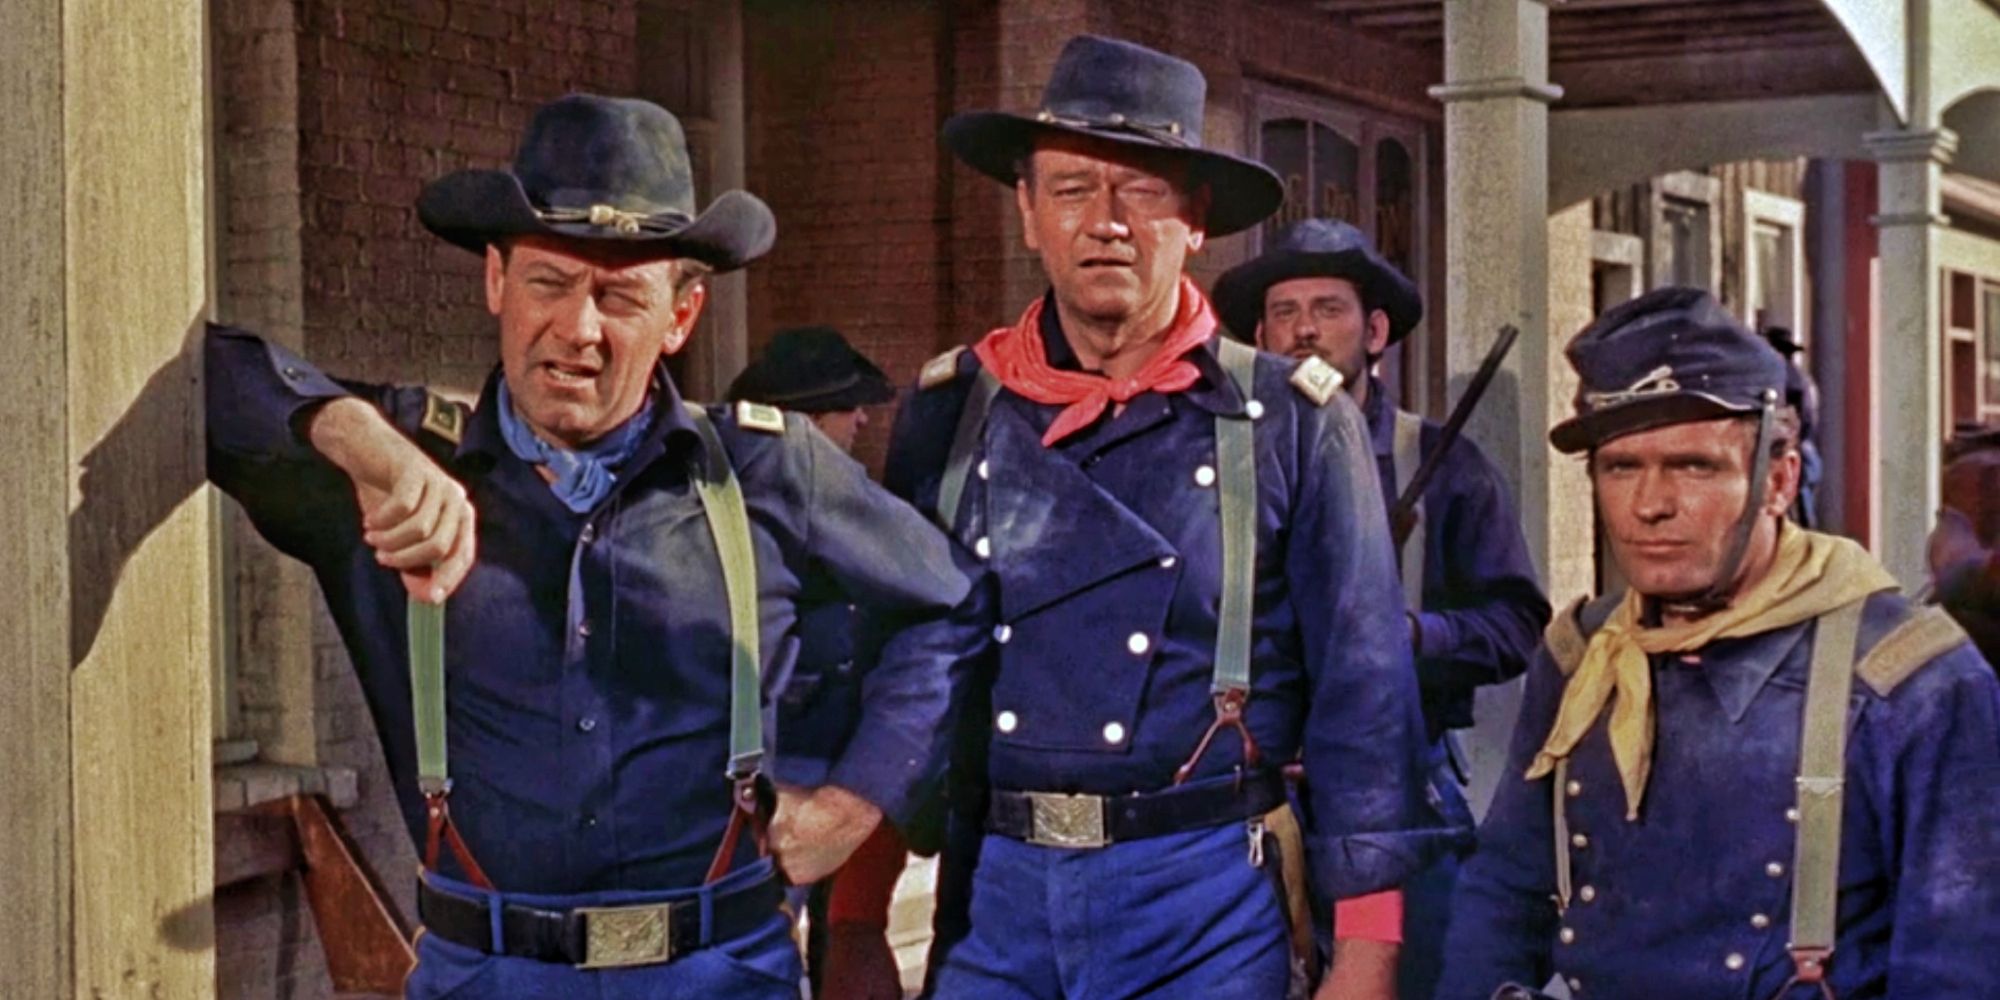 John Wayne, William Holden, and William Leslie in 1959's The Horse Soldiers